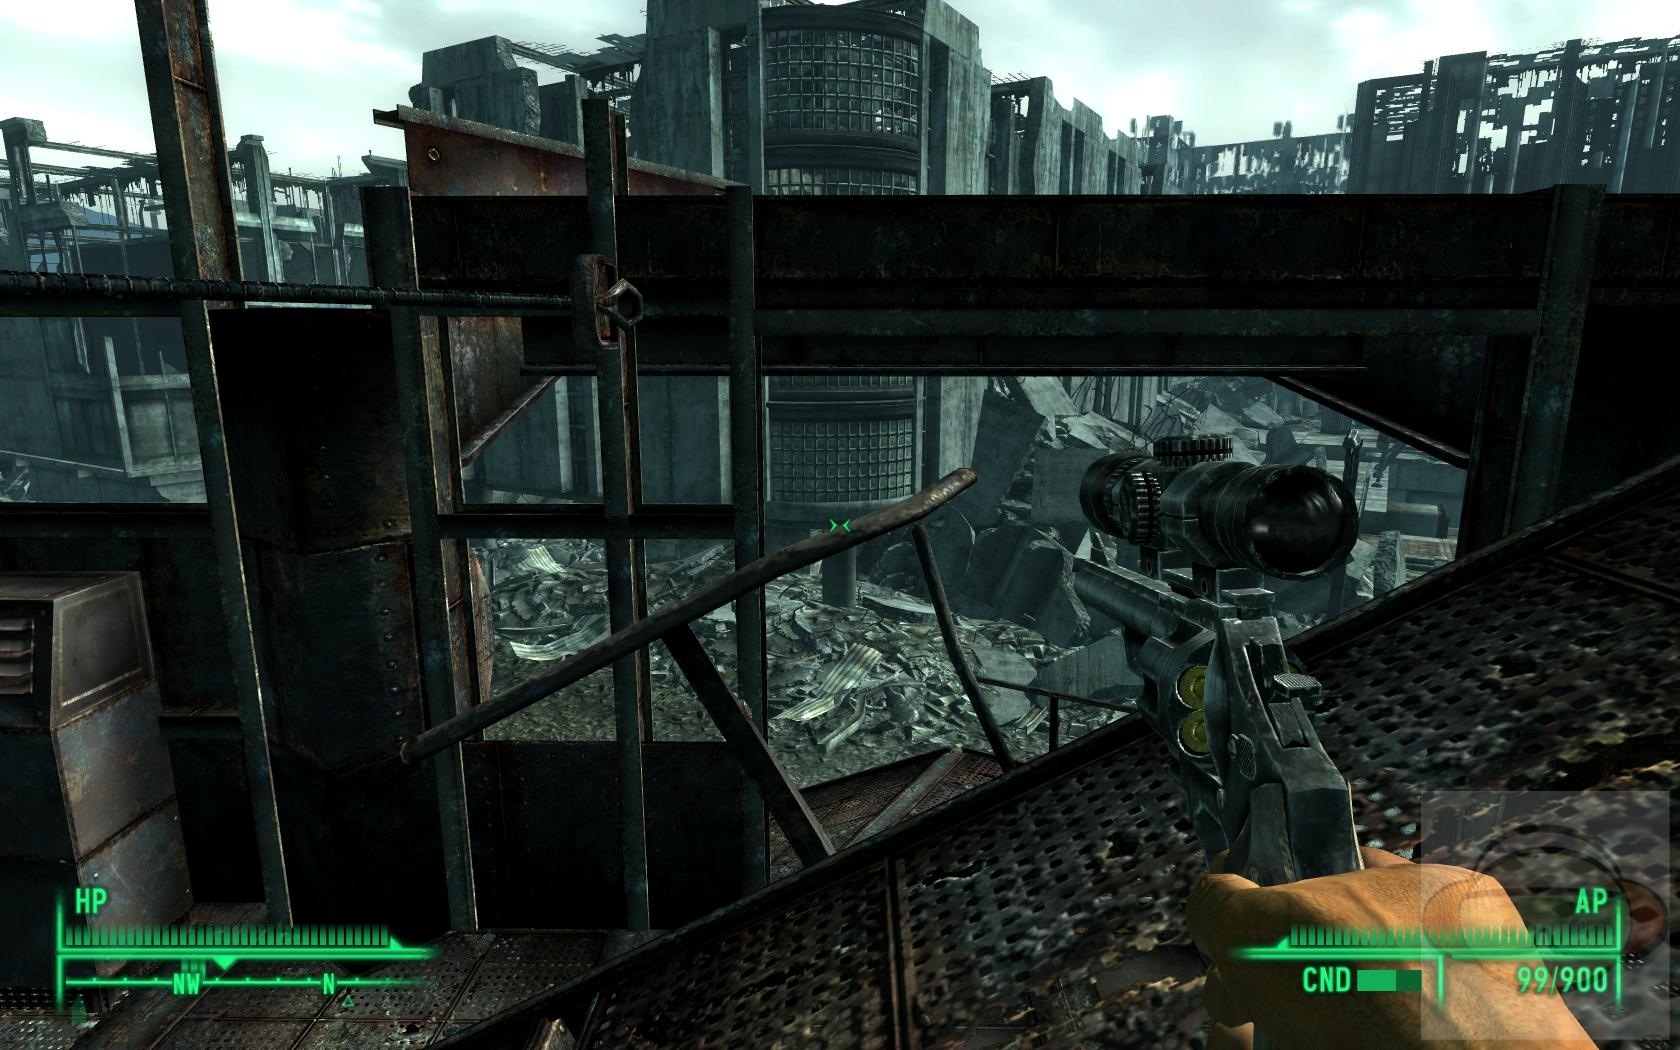 Fallout 3 (2008) - PC Gameplay 4k 2160p / Win 10 